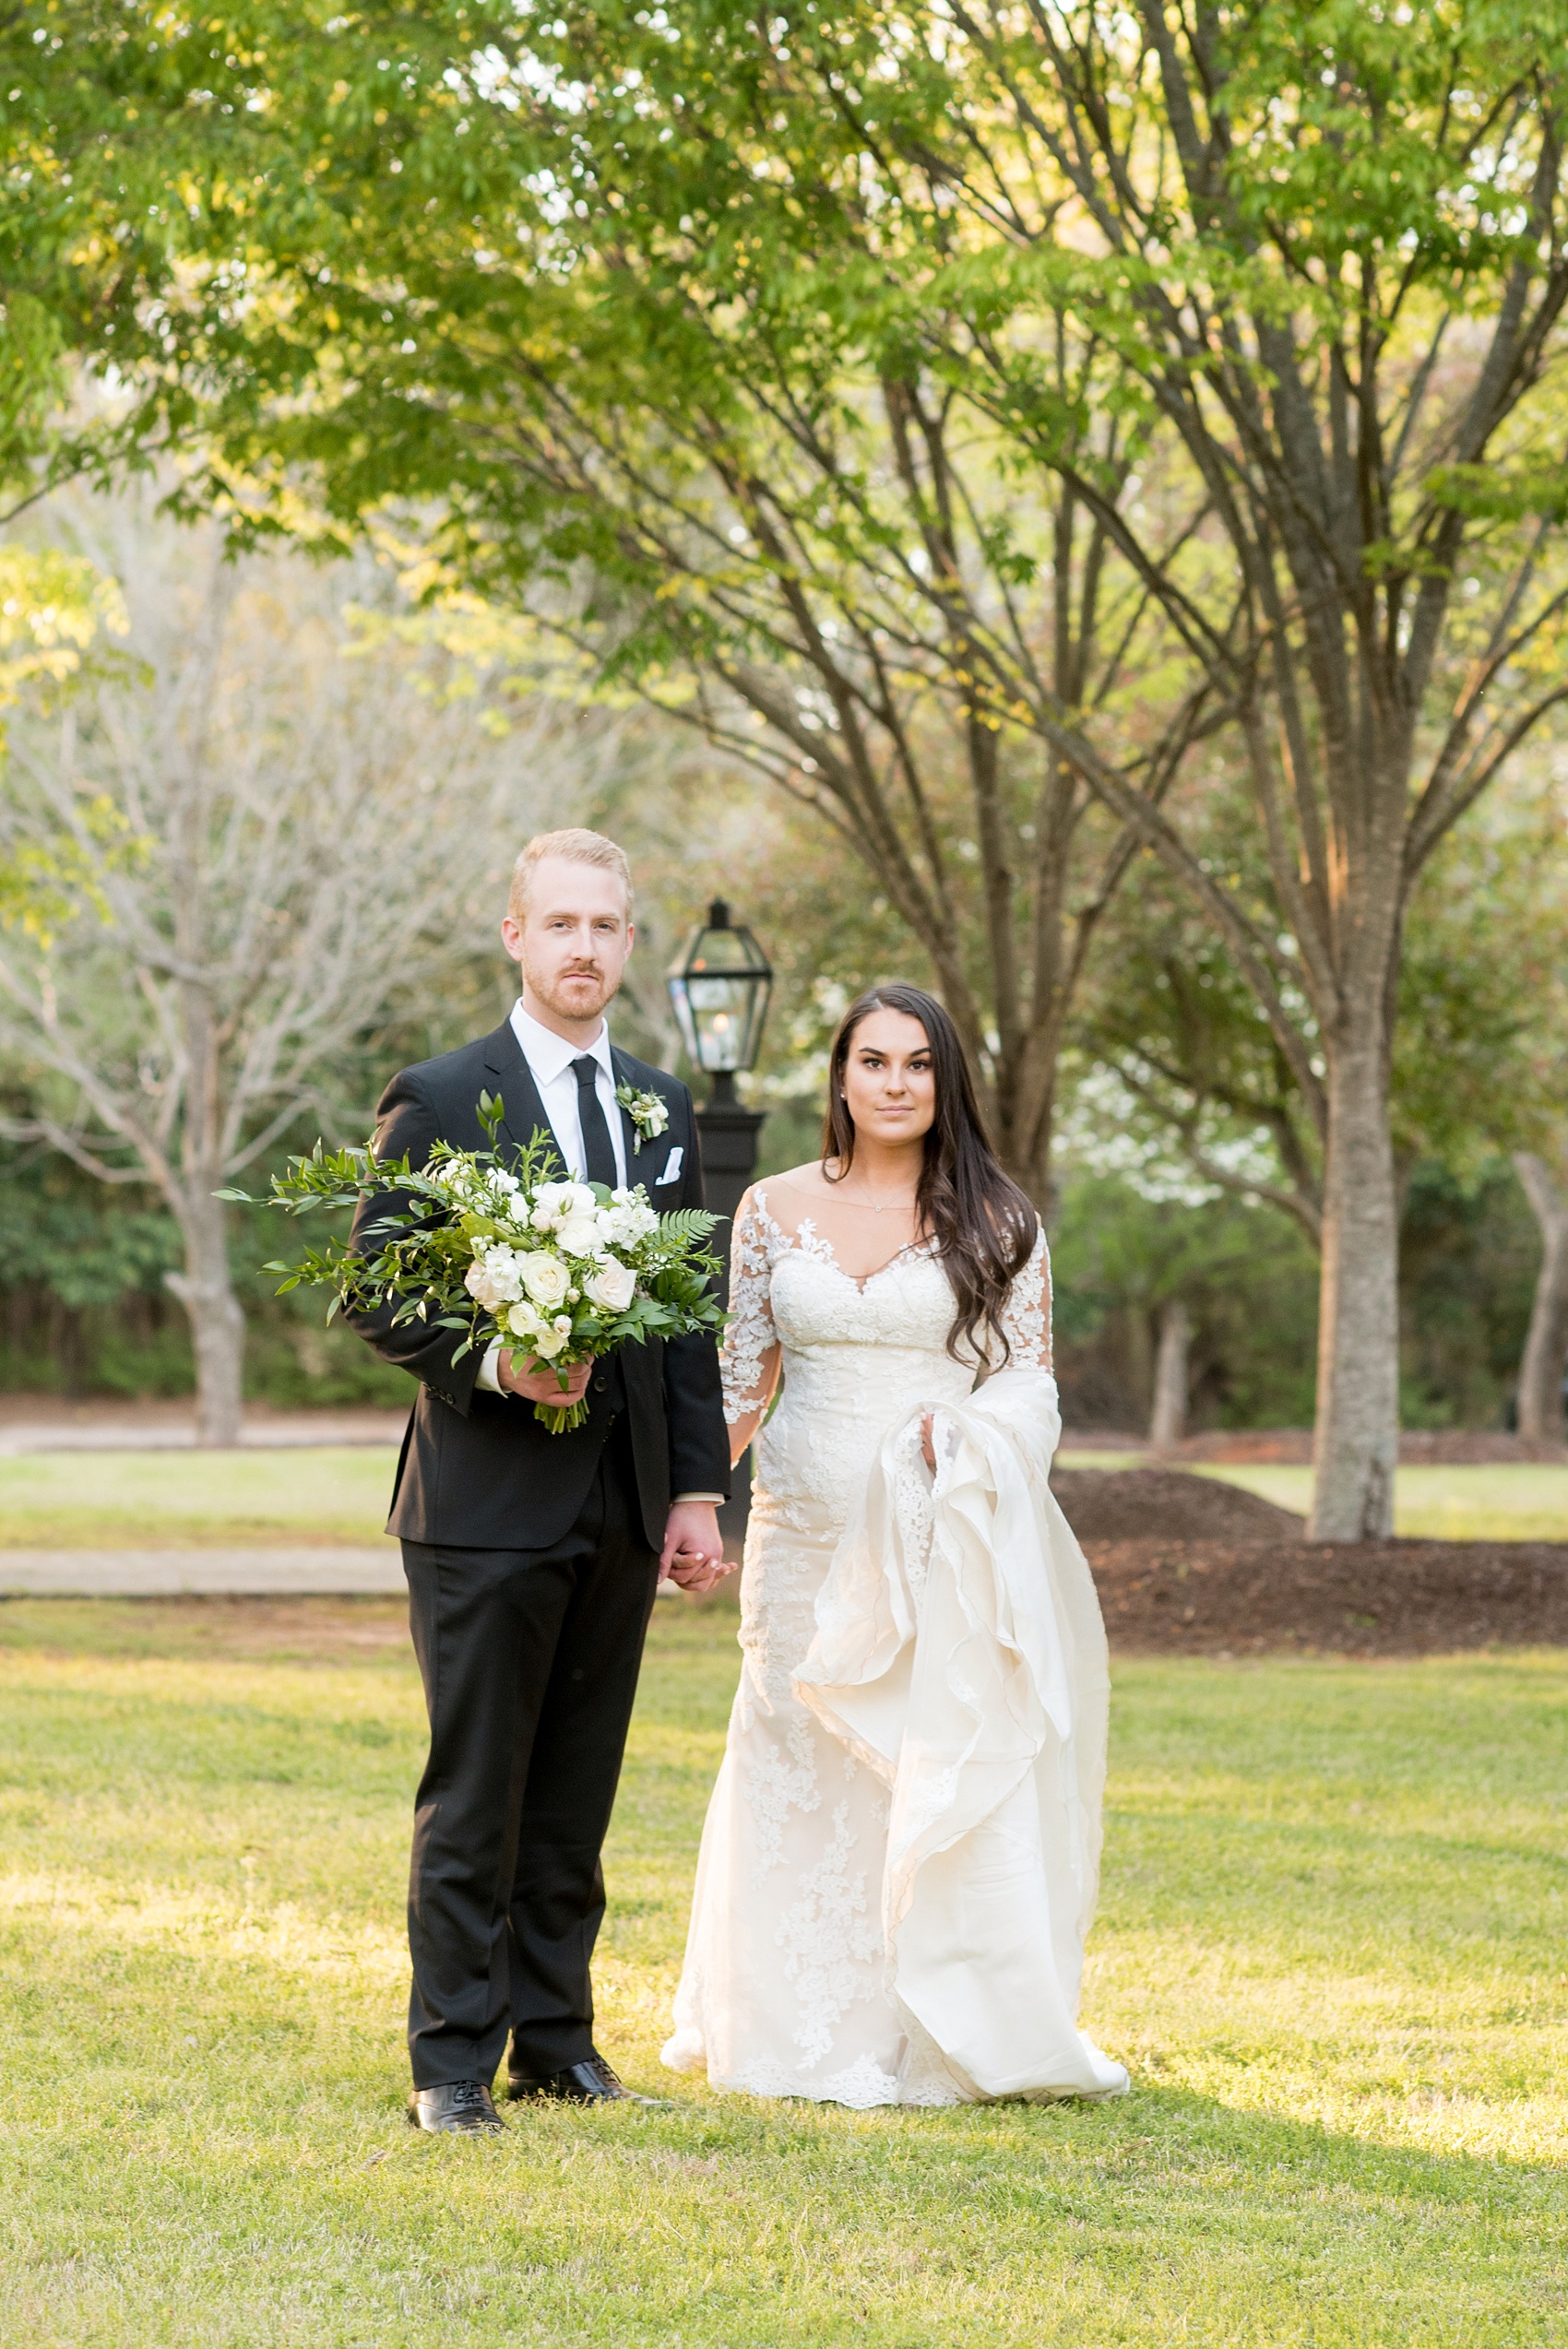 The Sutherland Wedding Photos by Mikkel Paige Photography. Vogue like wedding party picture with the bride in lace Pronovias and groom in a classic black tuxedo. Planning by A Southern Soiree.